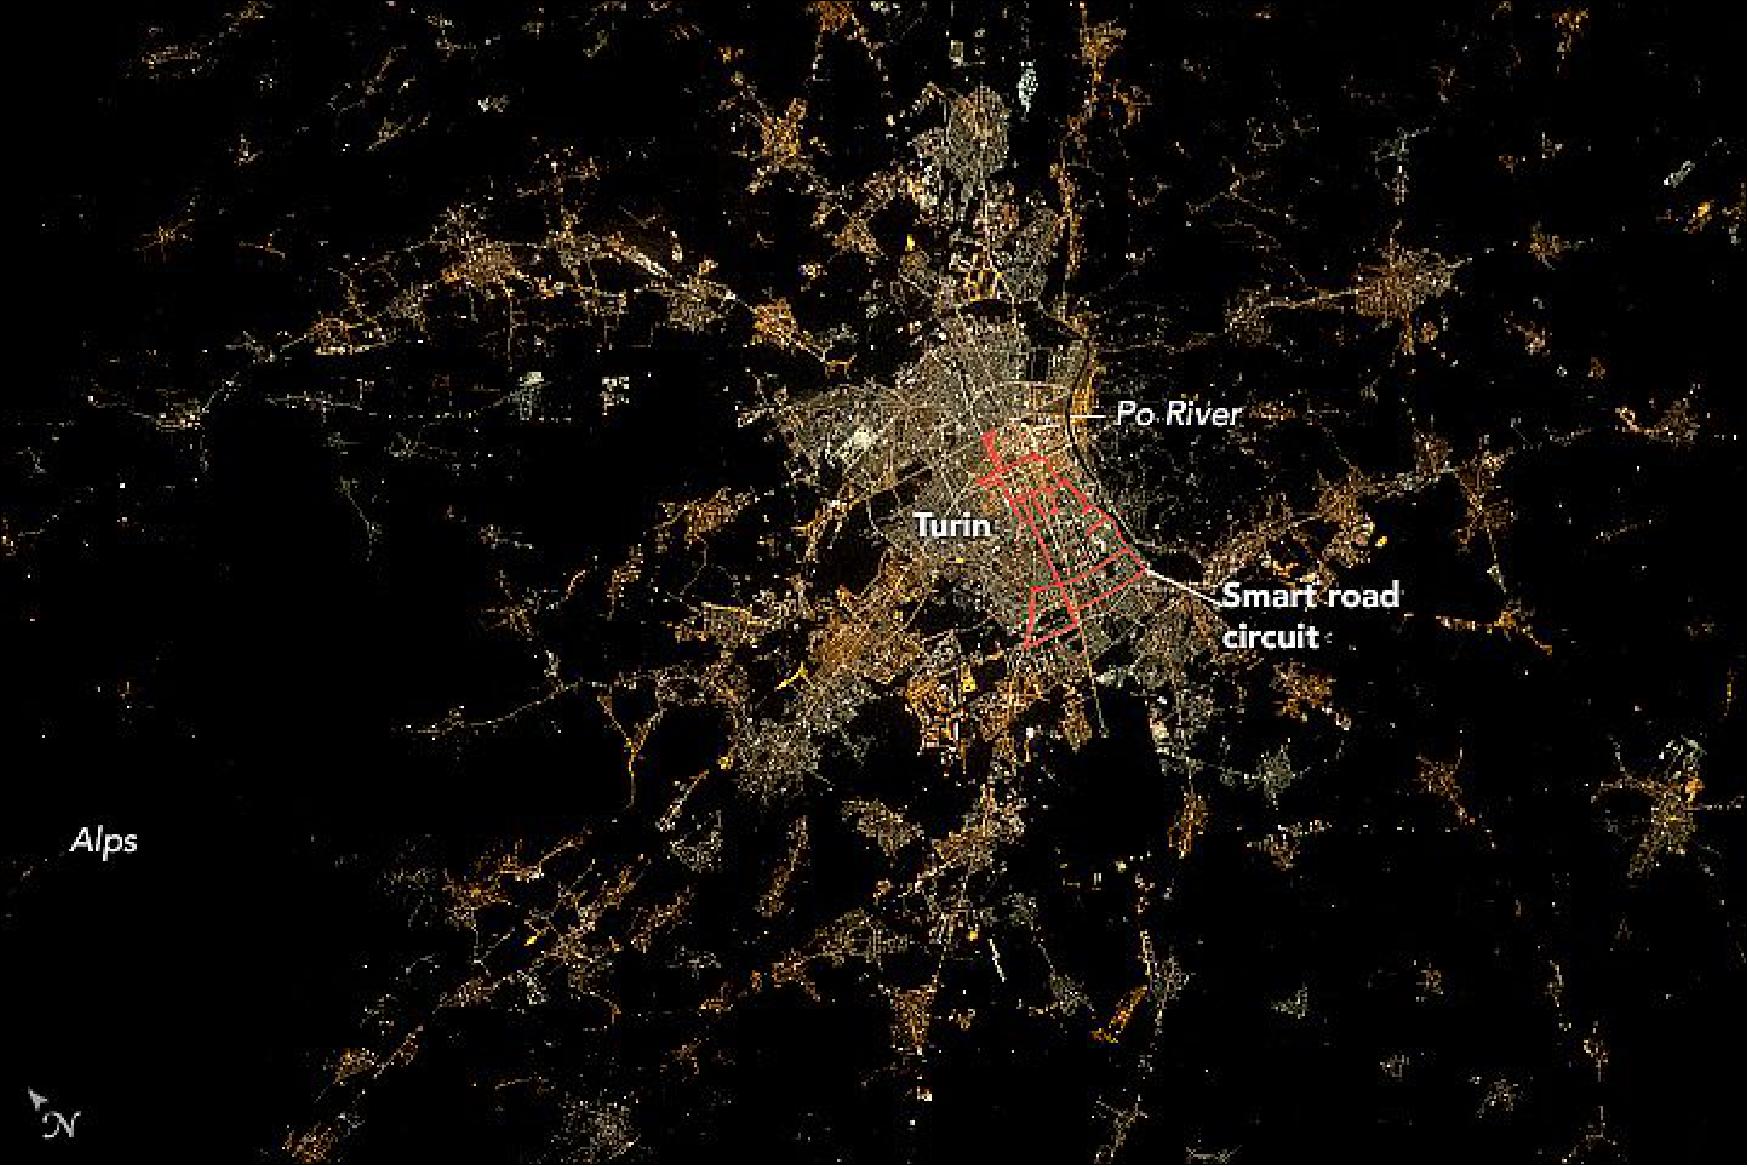 Figure 33: The smart road circuit map of Turin is traced out in this photo (image credit: NASA Earth Observatory)